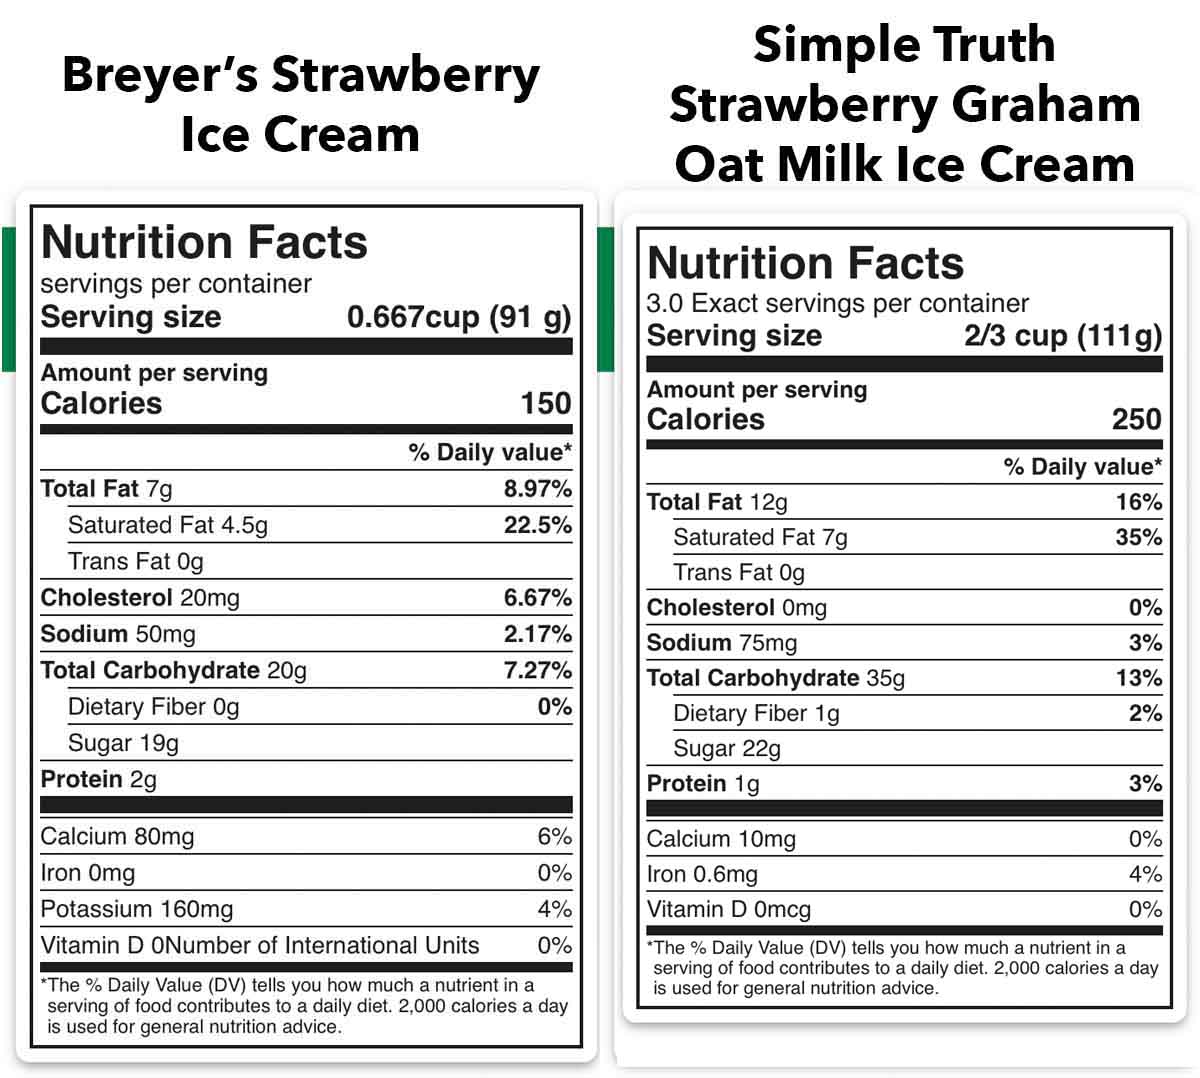 side-by-side comparison of Breyer's Strawberry and Simple Truth Oat Milk Ice Cream